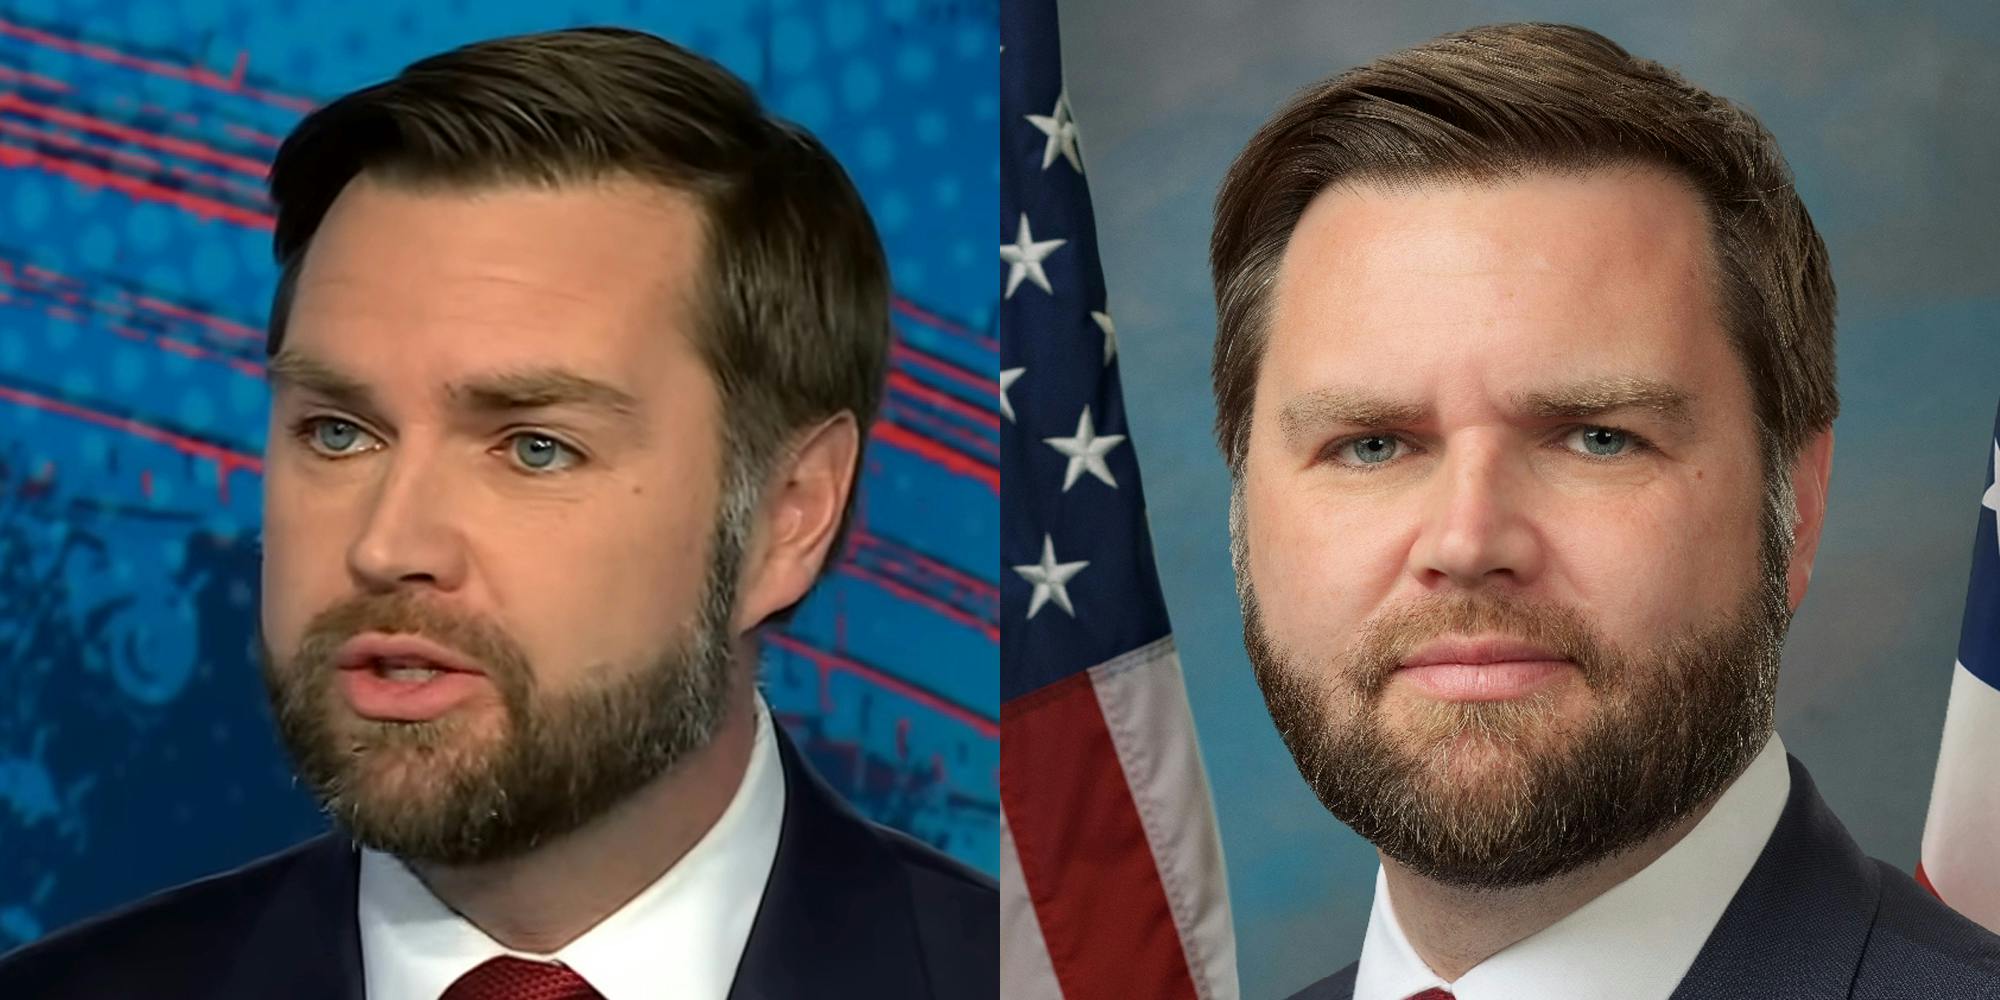 TikTok makeup artists think they’ve found JD Vance’s exact shade of eyeliner